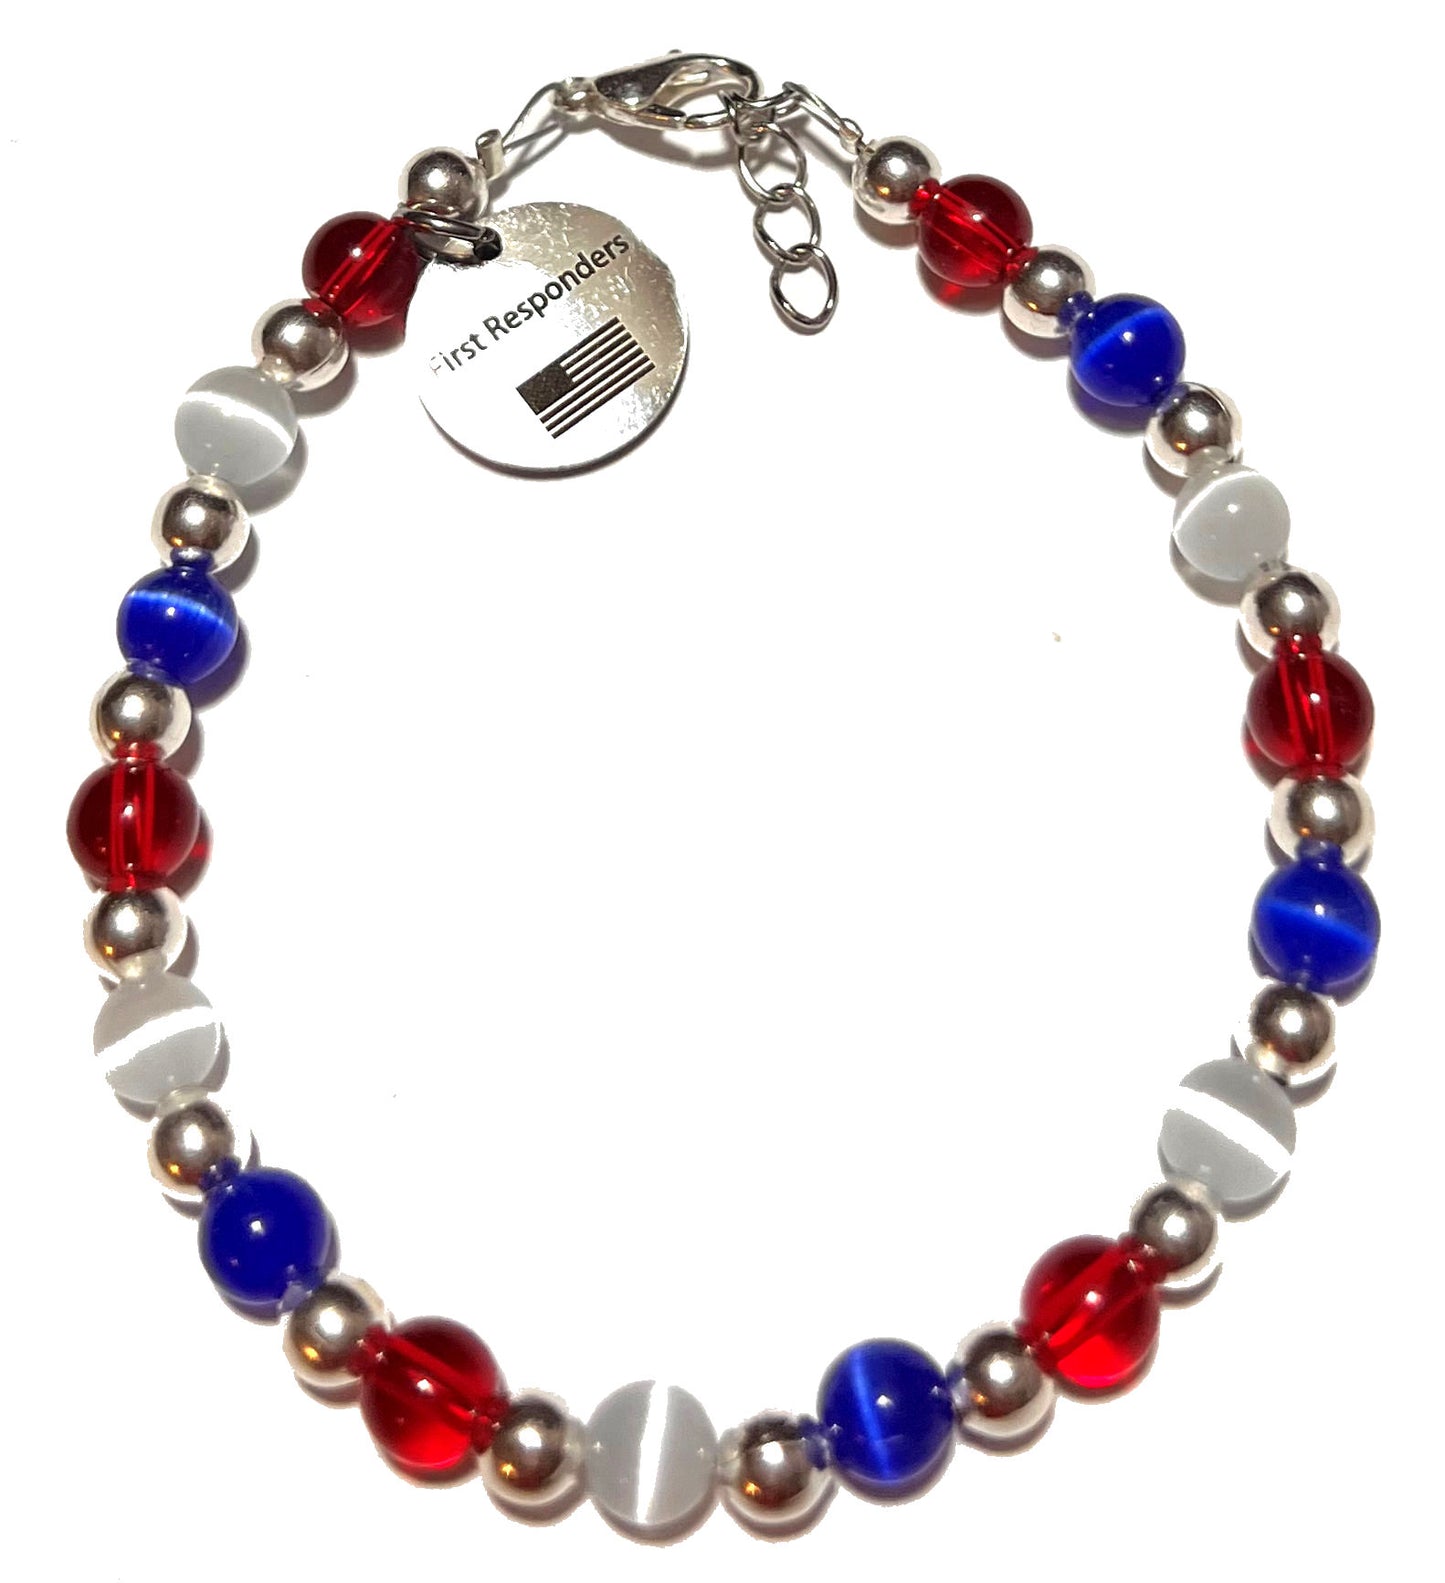 First Responder Awareness Charm With an American Flag, Beaded Bracelet, 7.75 Inches, Red, White & Blue Colors, Cat's Eye Beads, Handbeaded in the USA